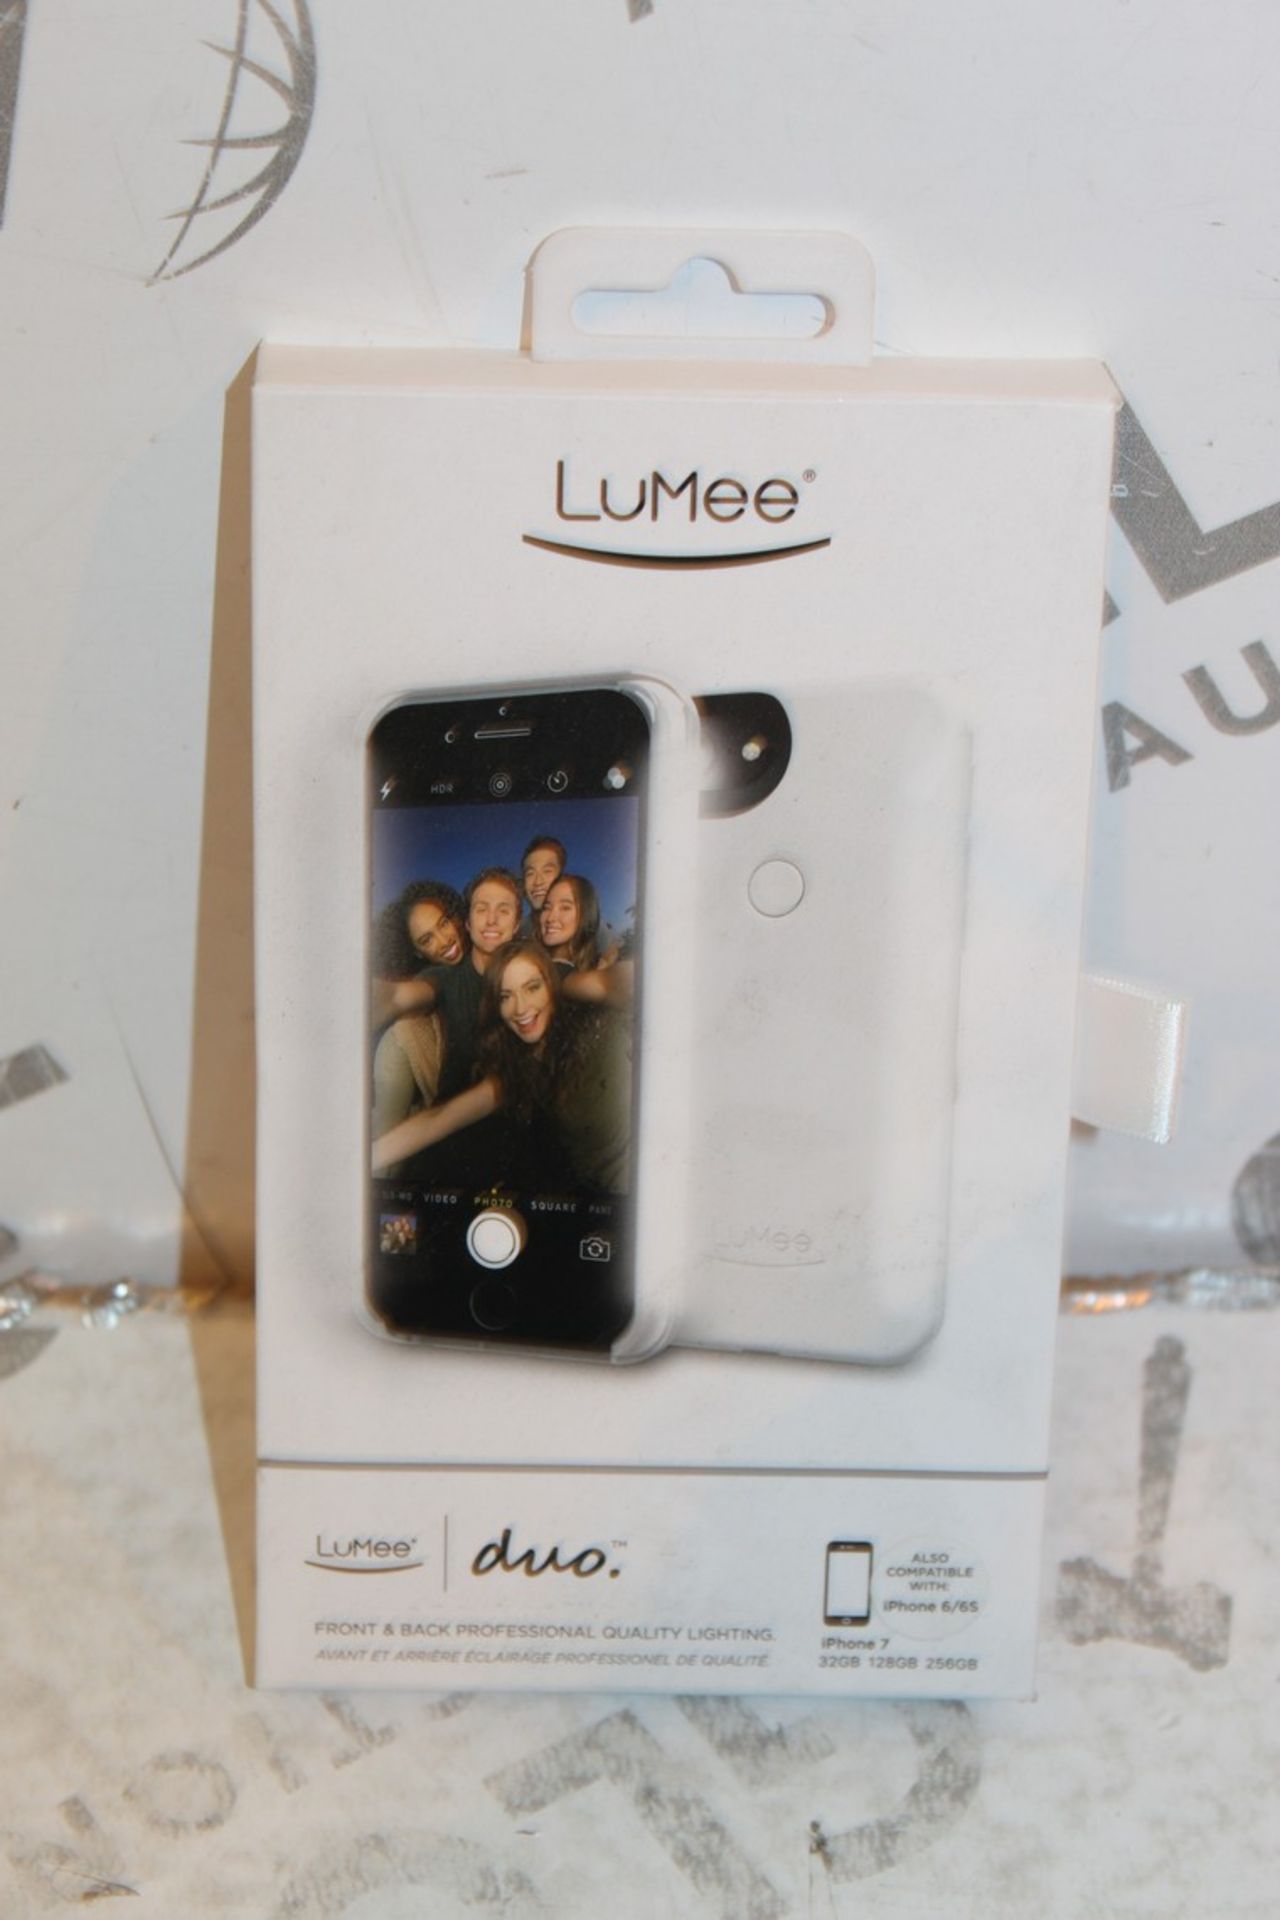 Lot to Contain 2 Boxed Brand New Lumee Duo Iphone 7 Perfect Lighting Phone Cases (White) RRP £100 (